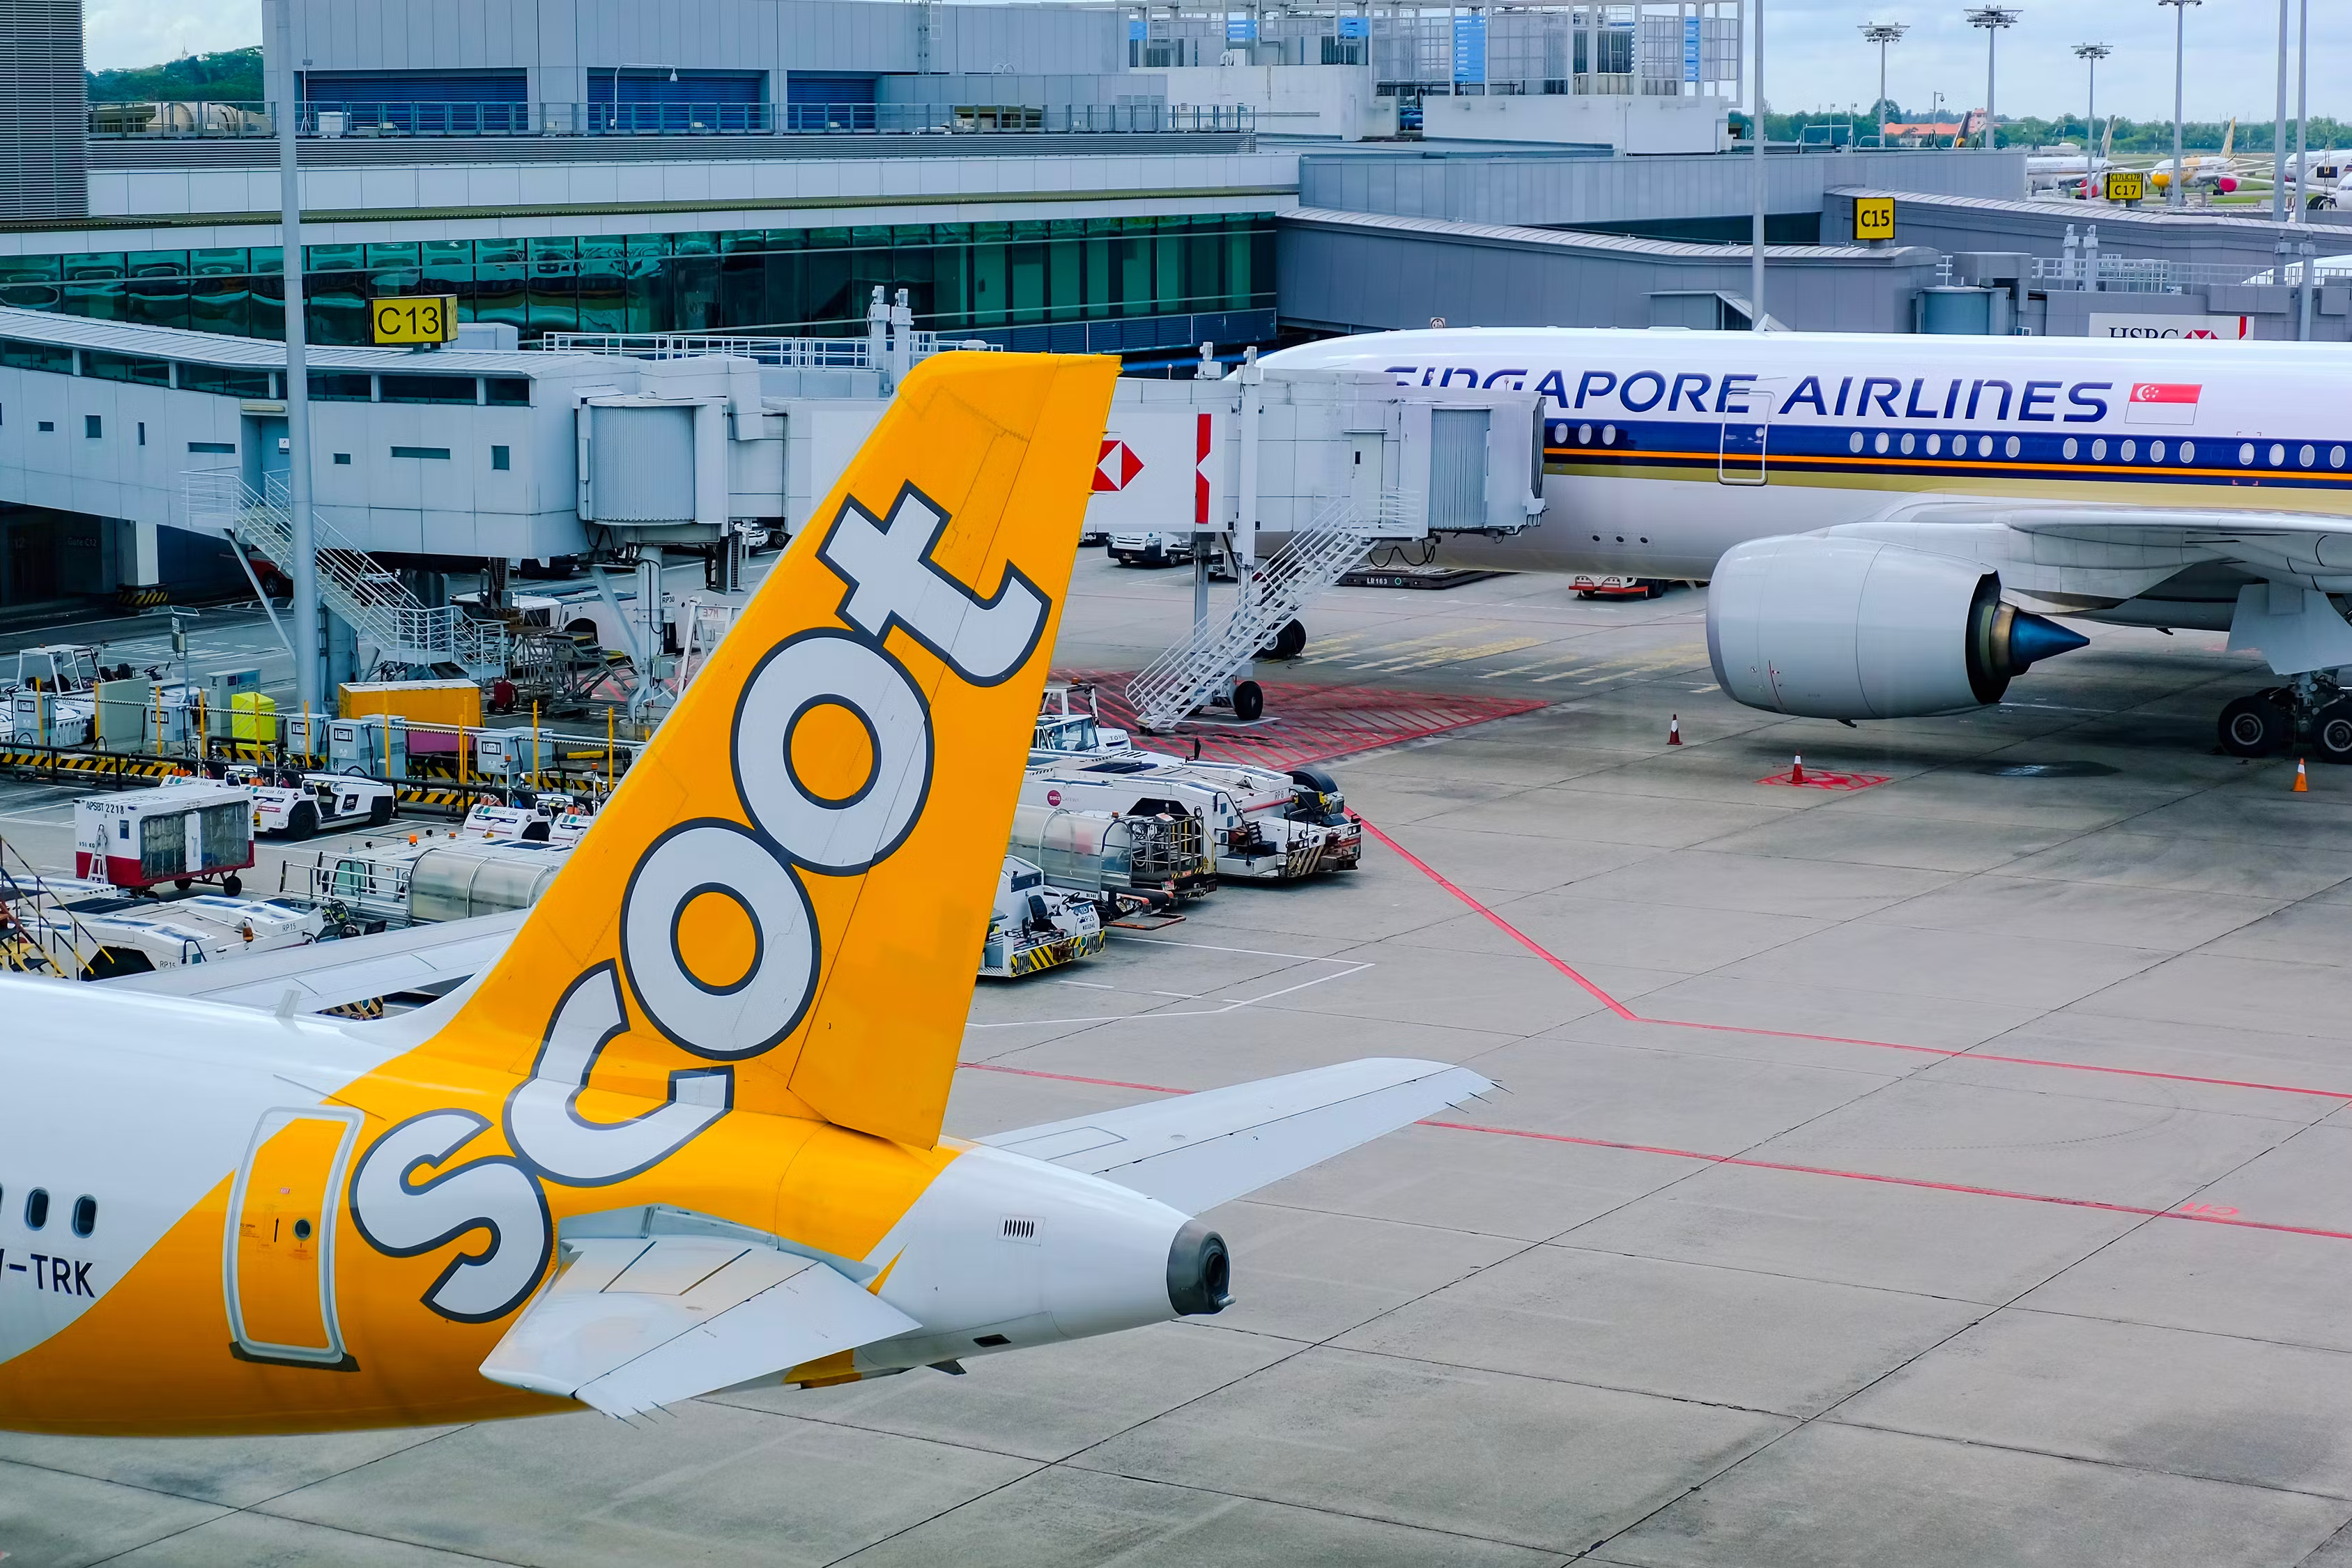 Singapore AIrlines and Scoot Aircraft Parked At Gates At Singapore Changi Airport.